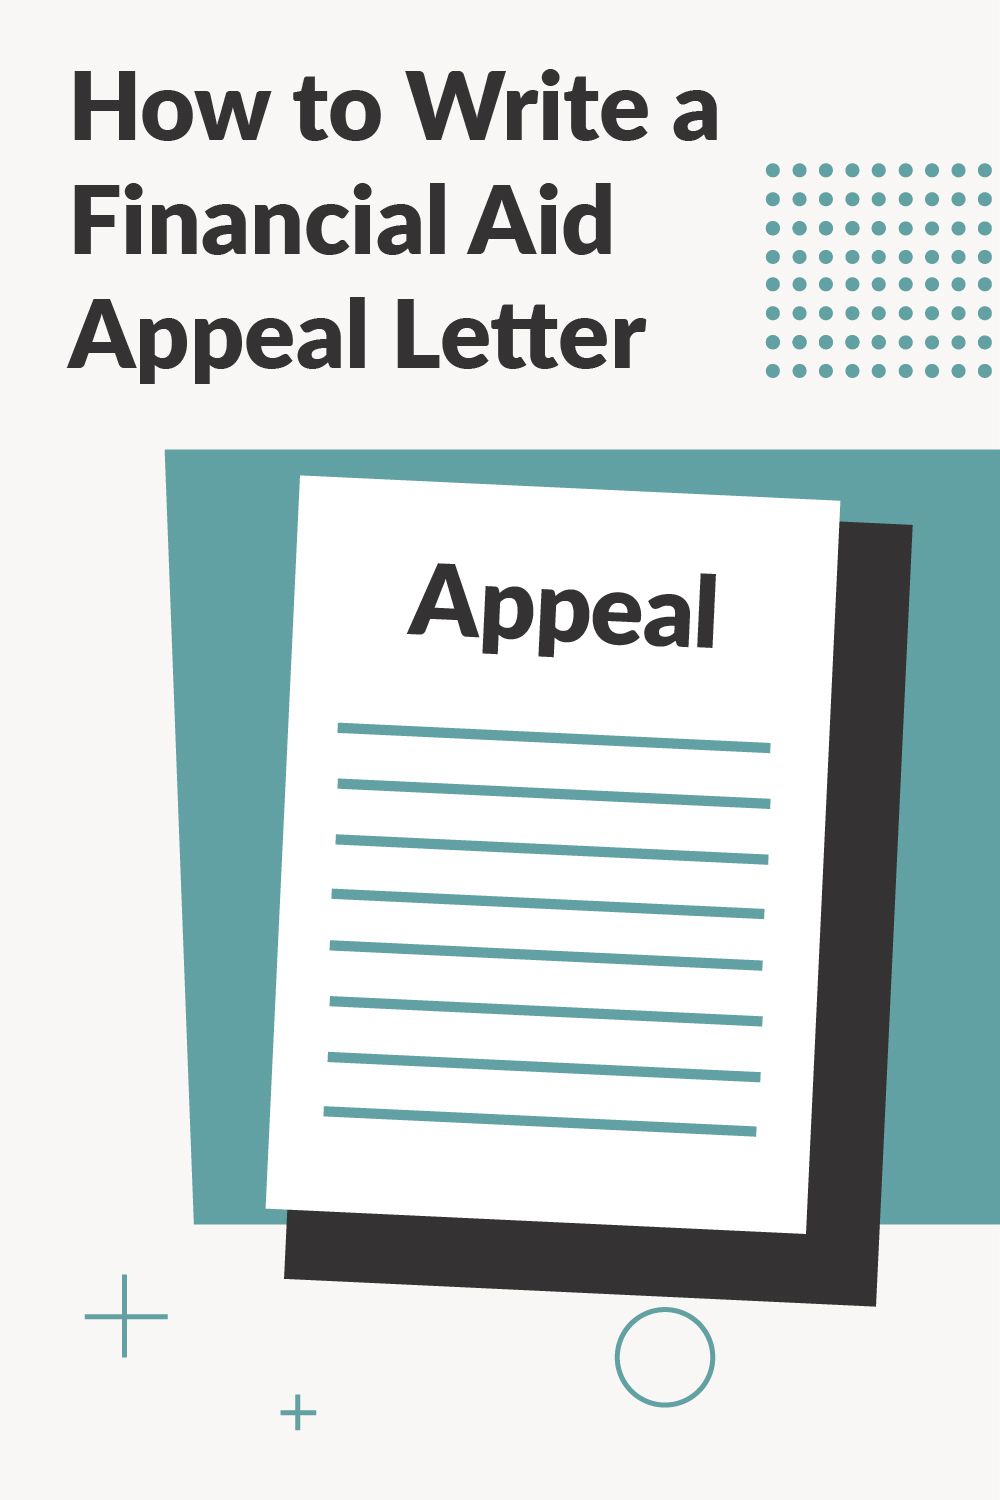 financial aid appeal letter pinterest image